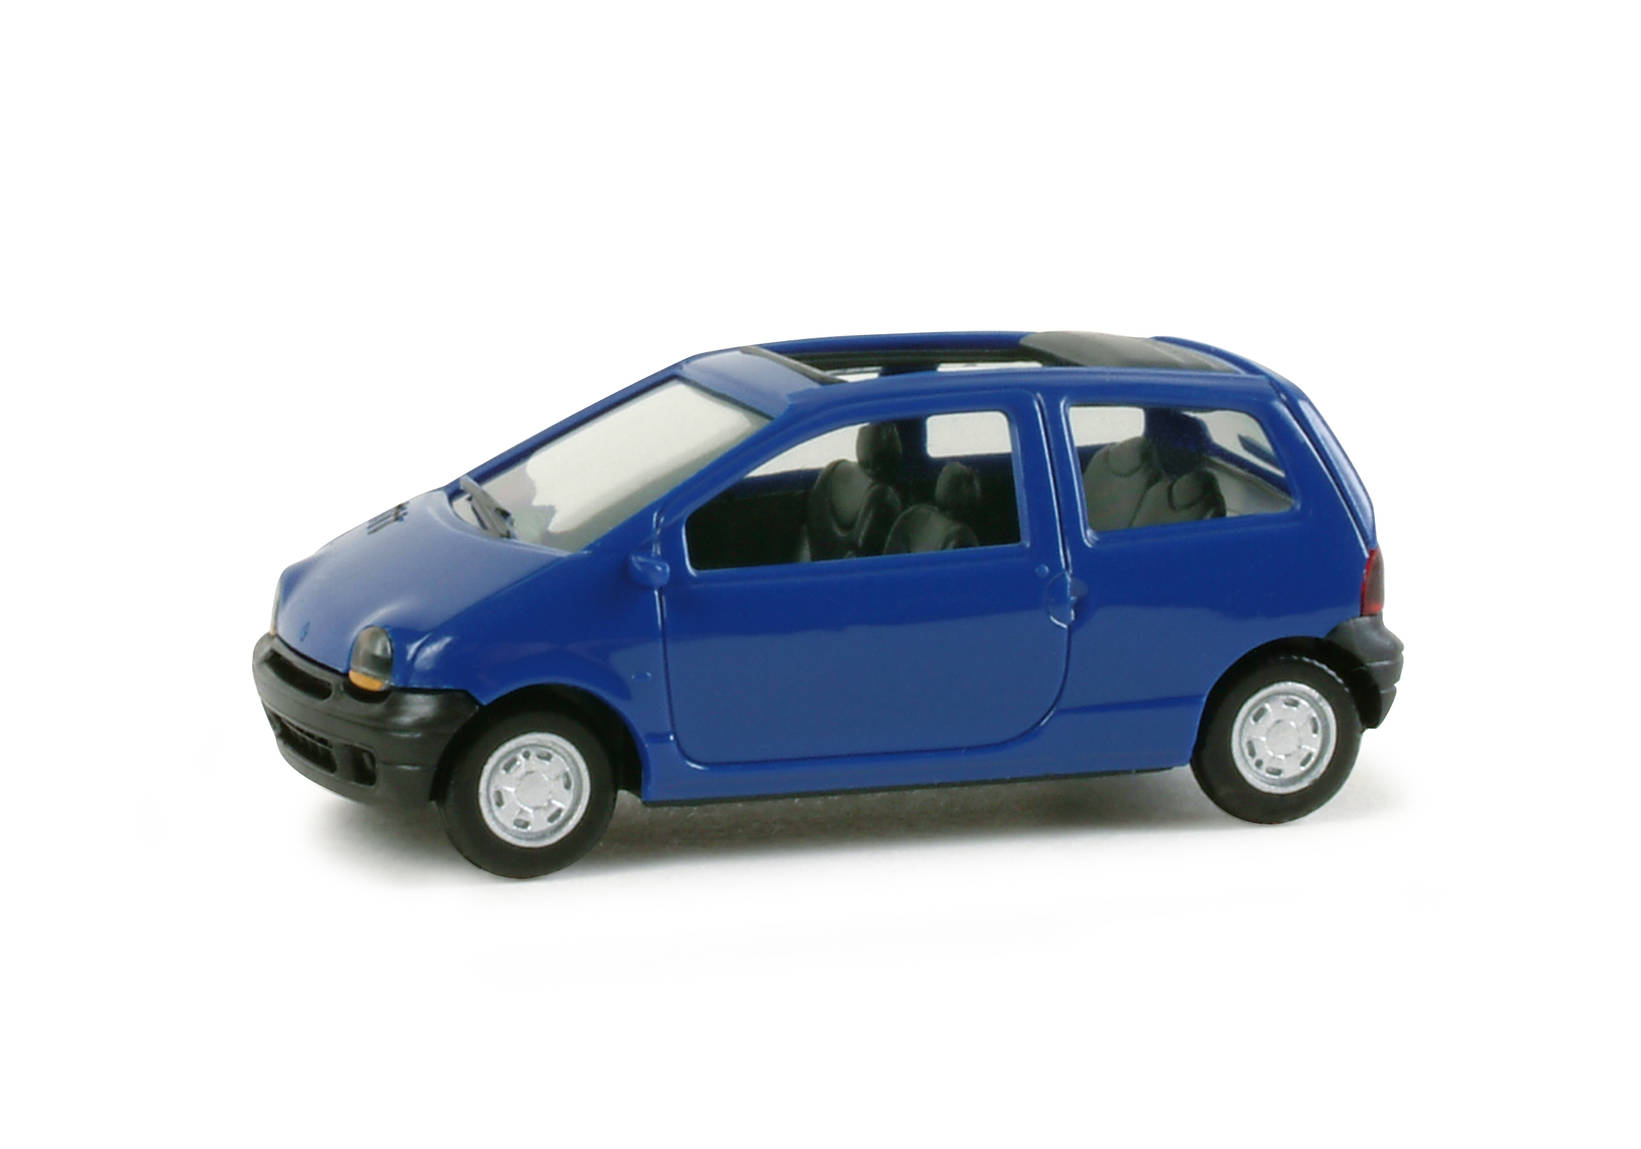 Renault Twingo, with folding top open